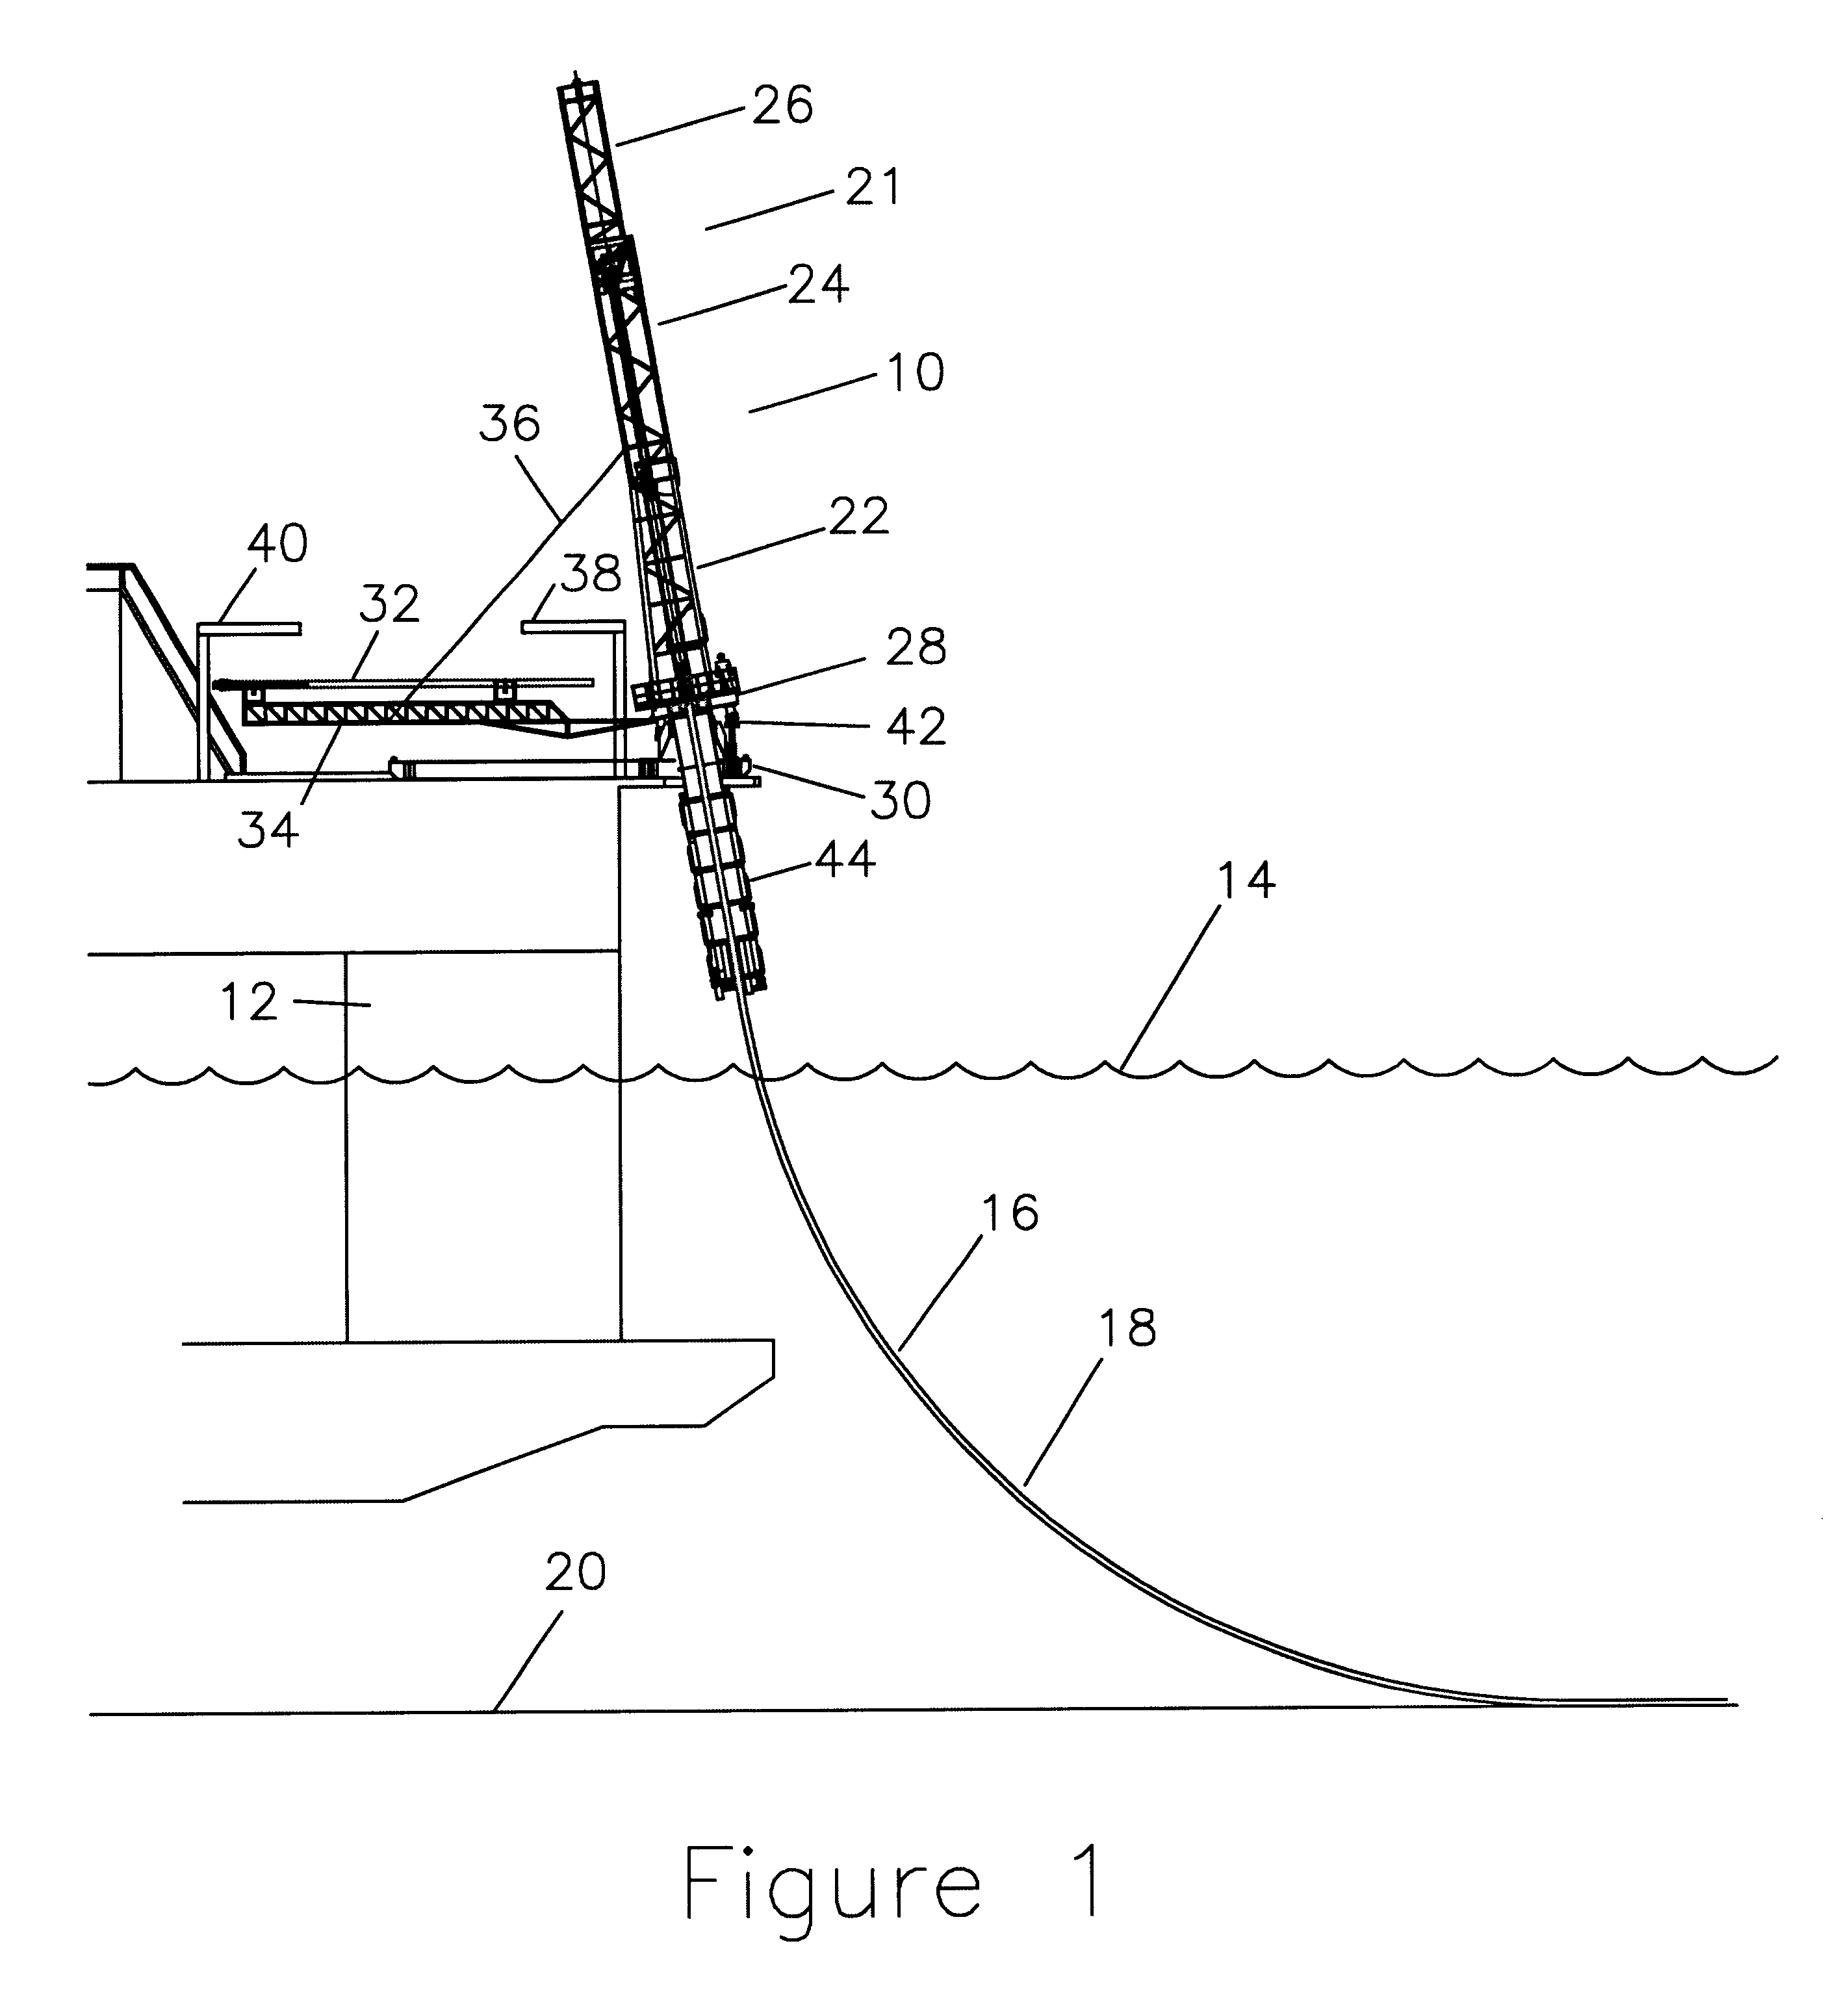 Erector for J-Lay pipe laying system